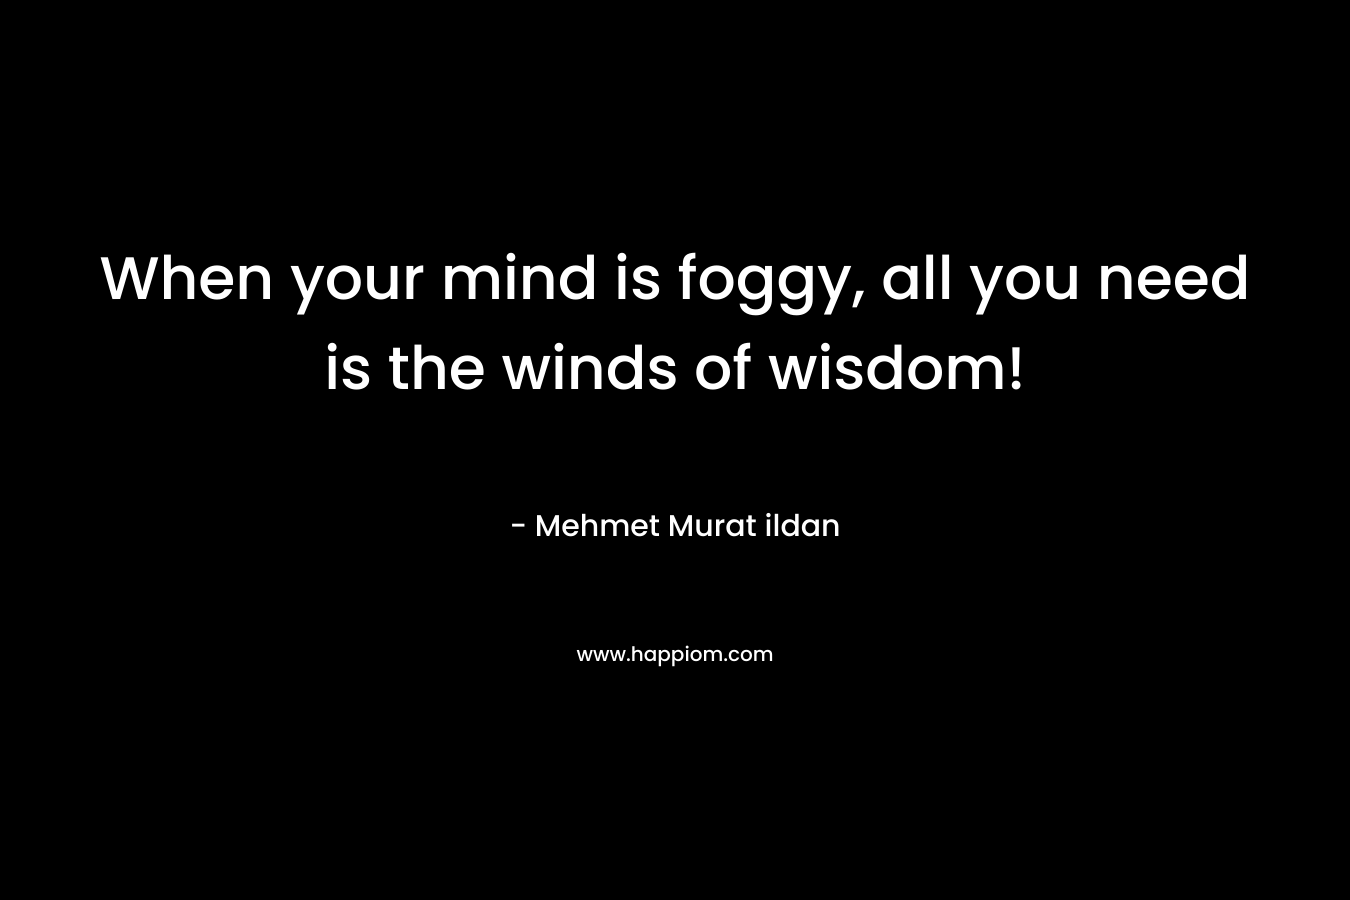 When your mind is foggy, all you need is the winds of wisdom!